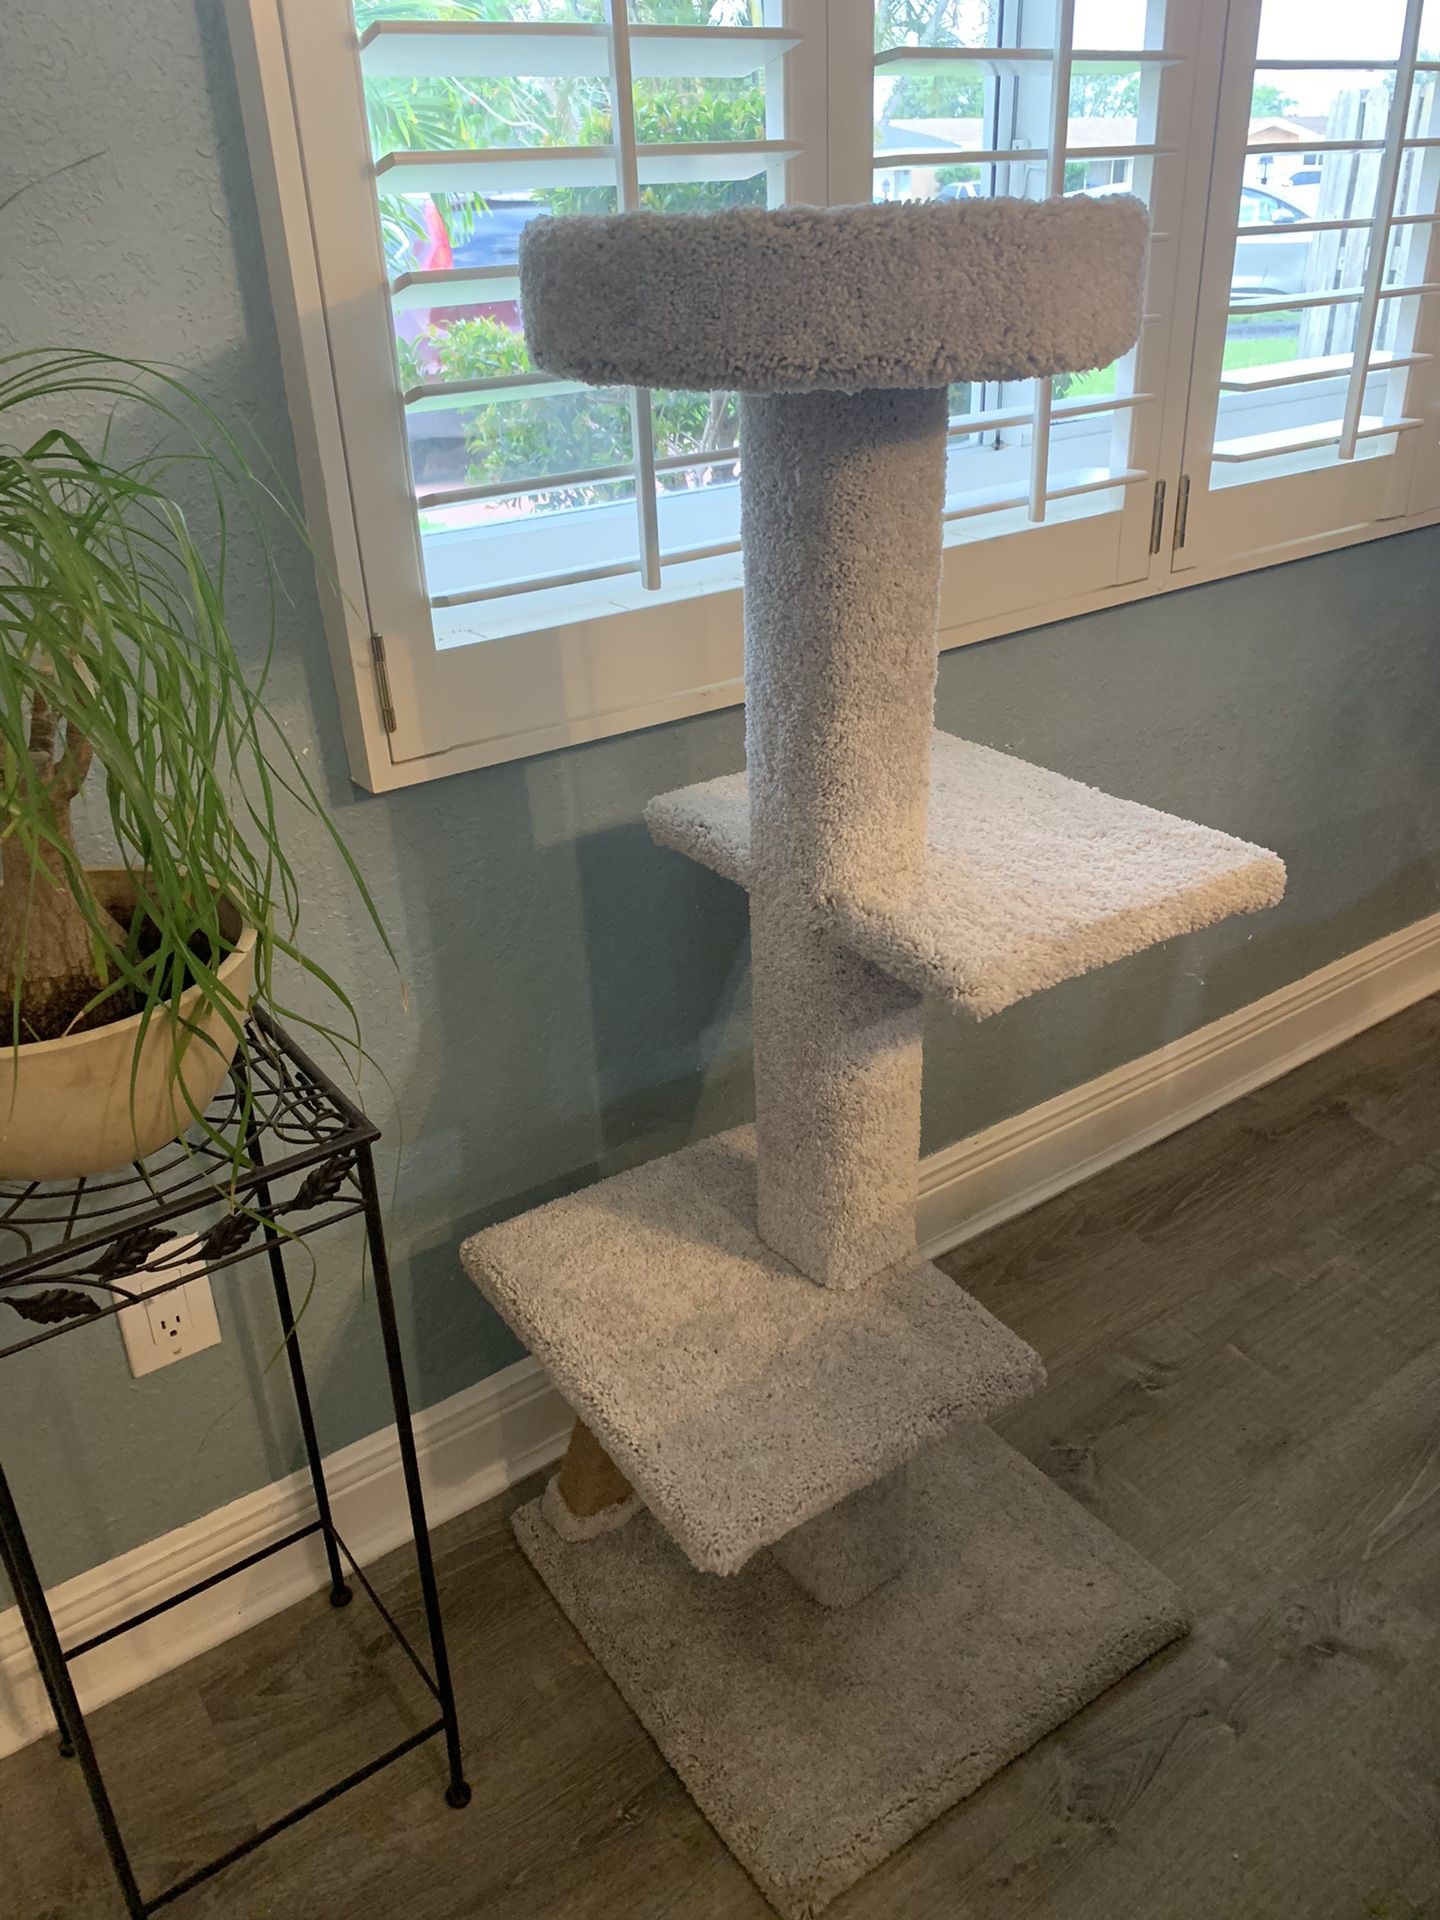 Large Multi-Level Plush Cat Tree Furniture Sisal-Covered Scratching Post, 48” tall x 19” wide